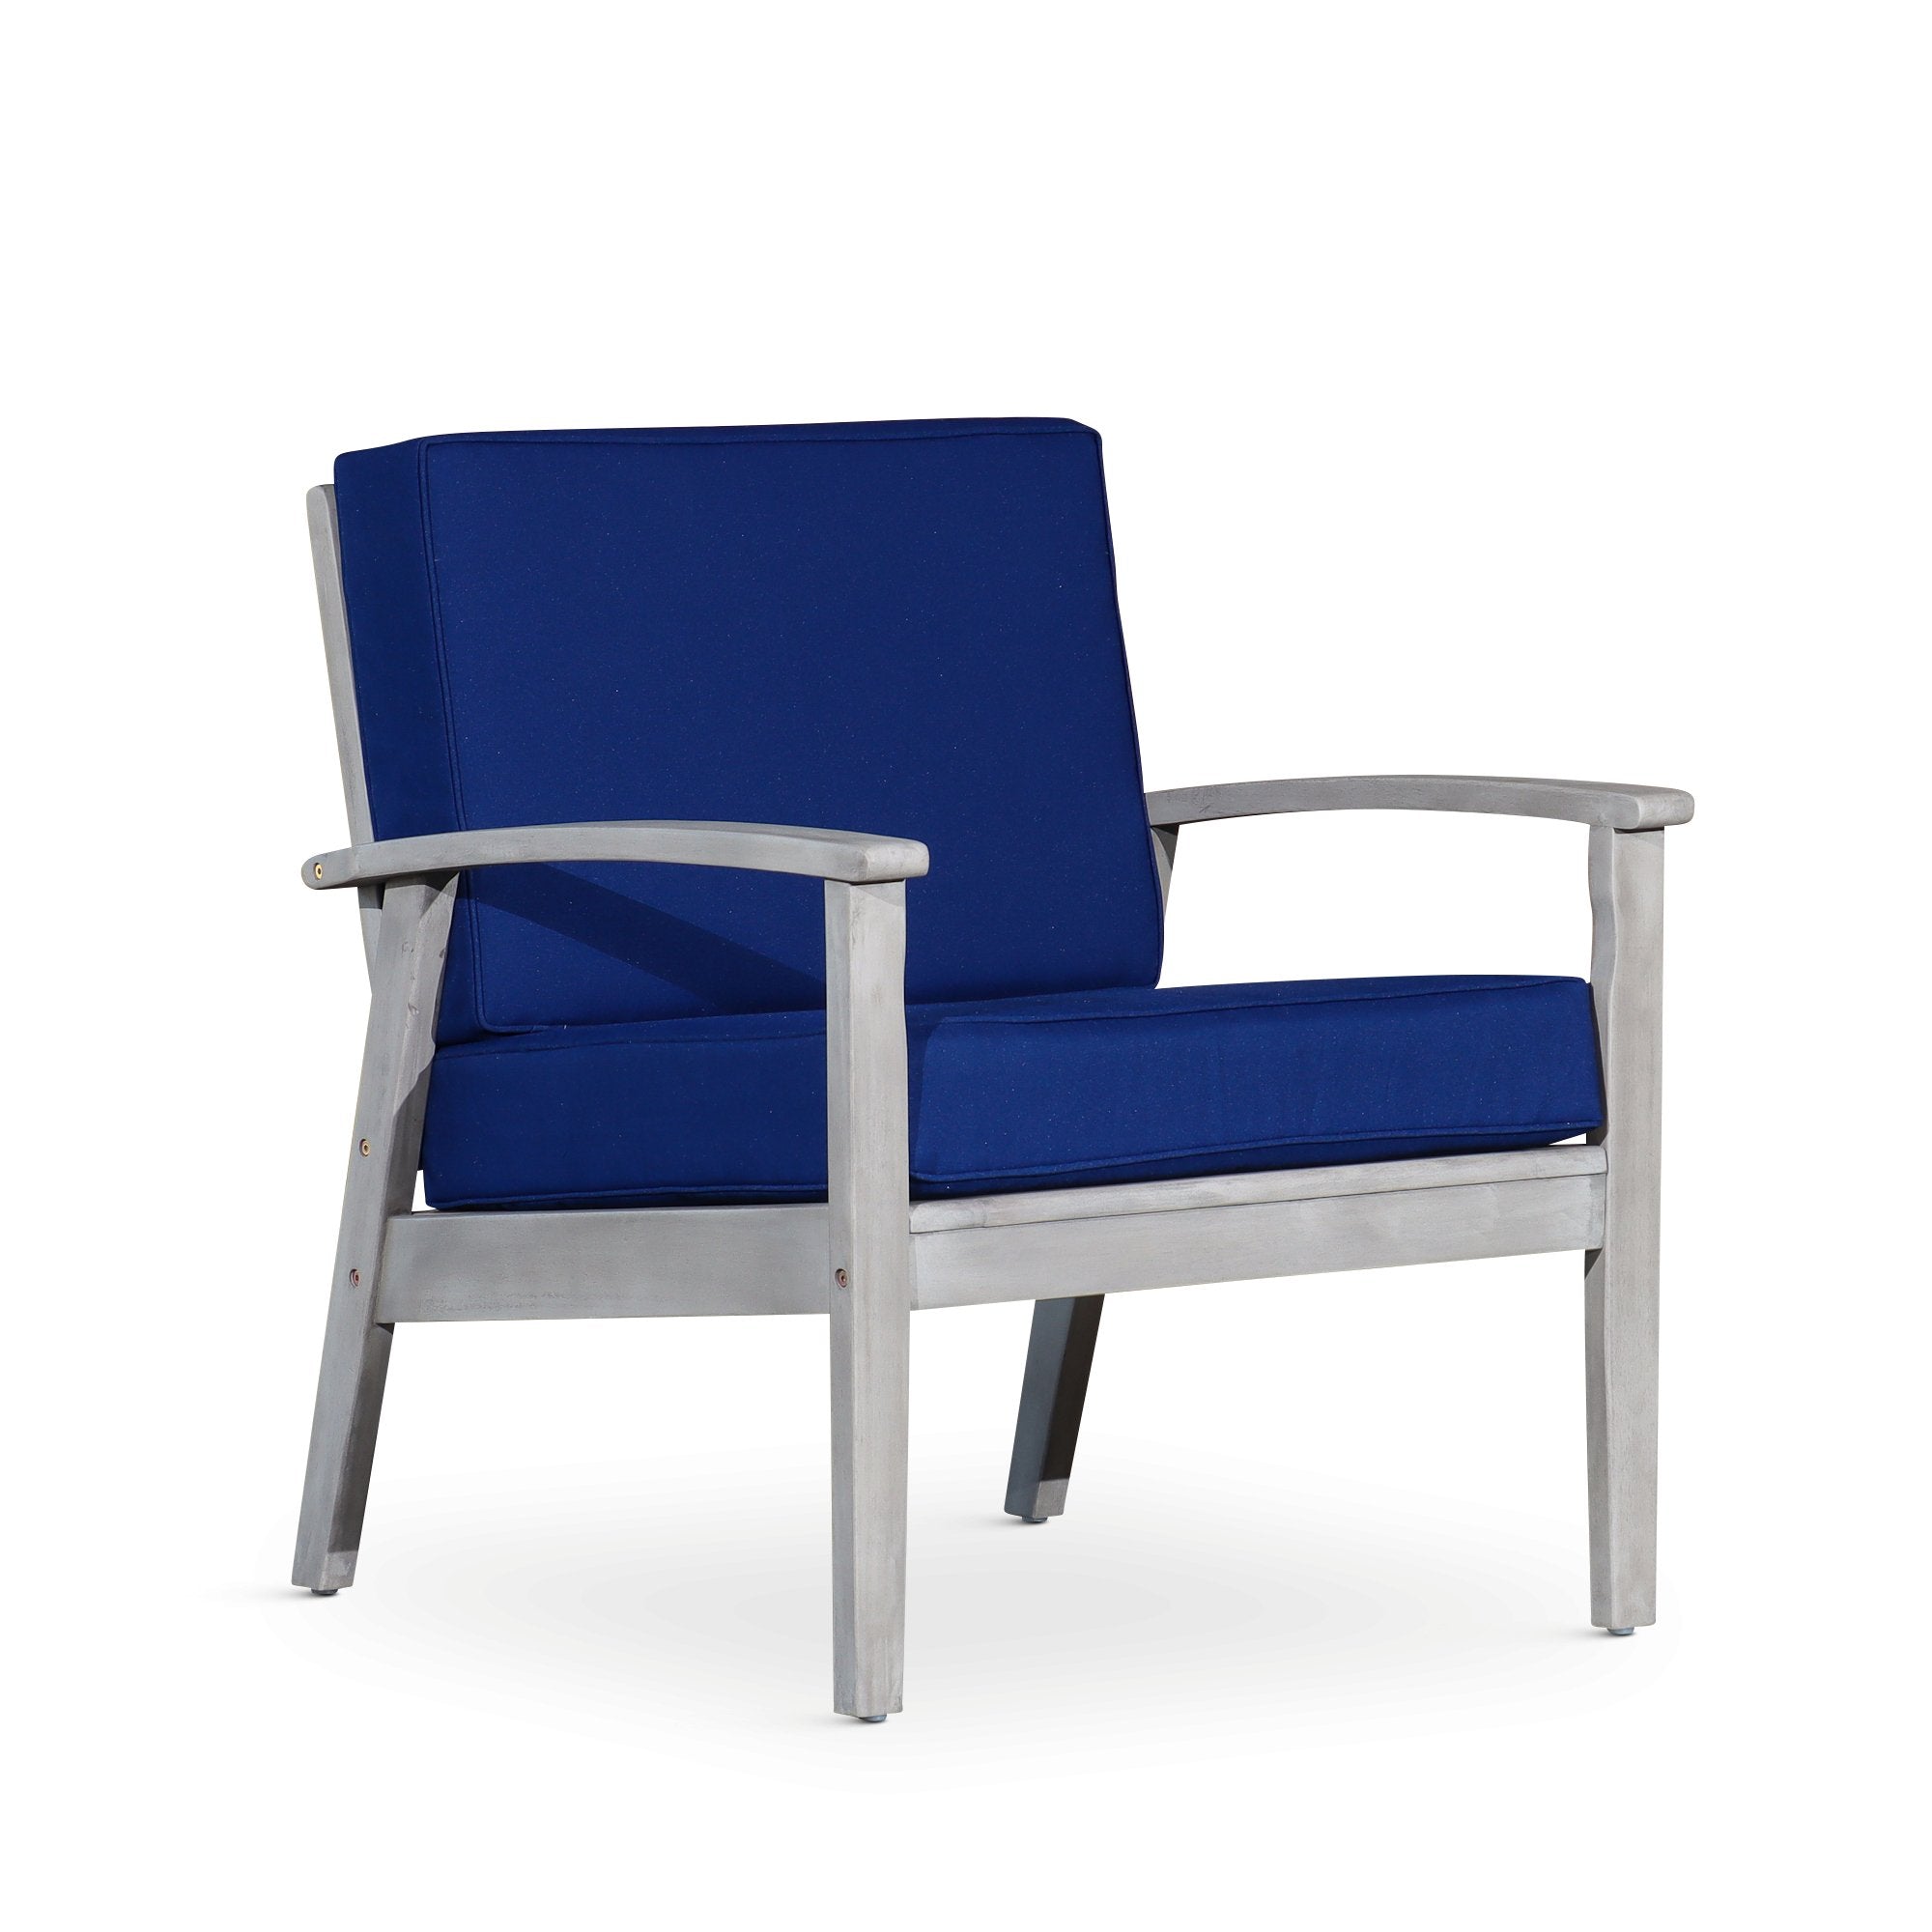 Deep-Seat-Outdoor-Chair,-Silver-Gray-Finish,-Navy-Cushion-Outdoor-Chairs